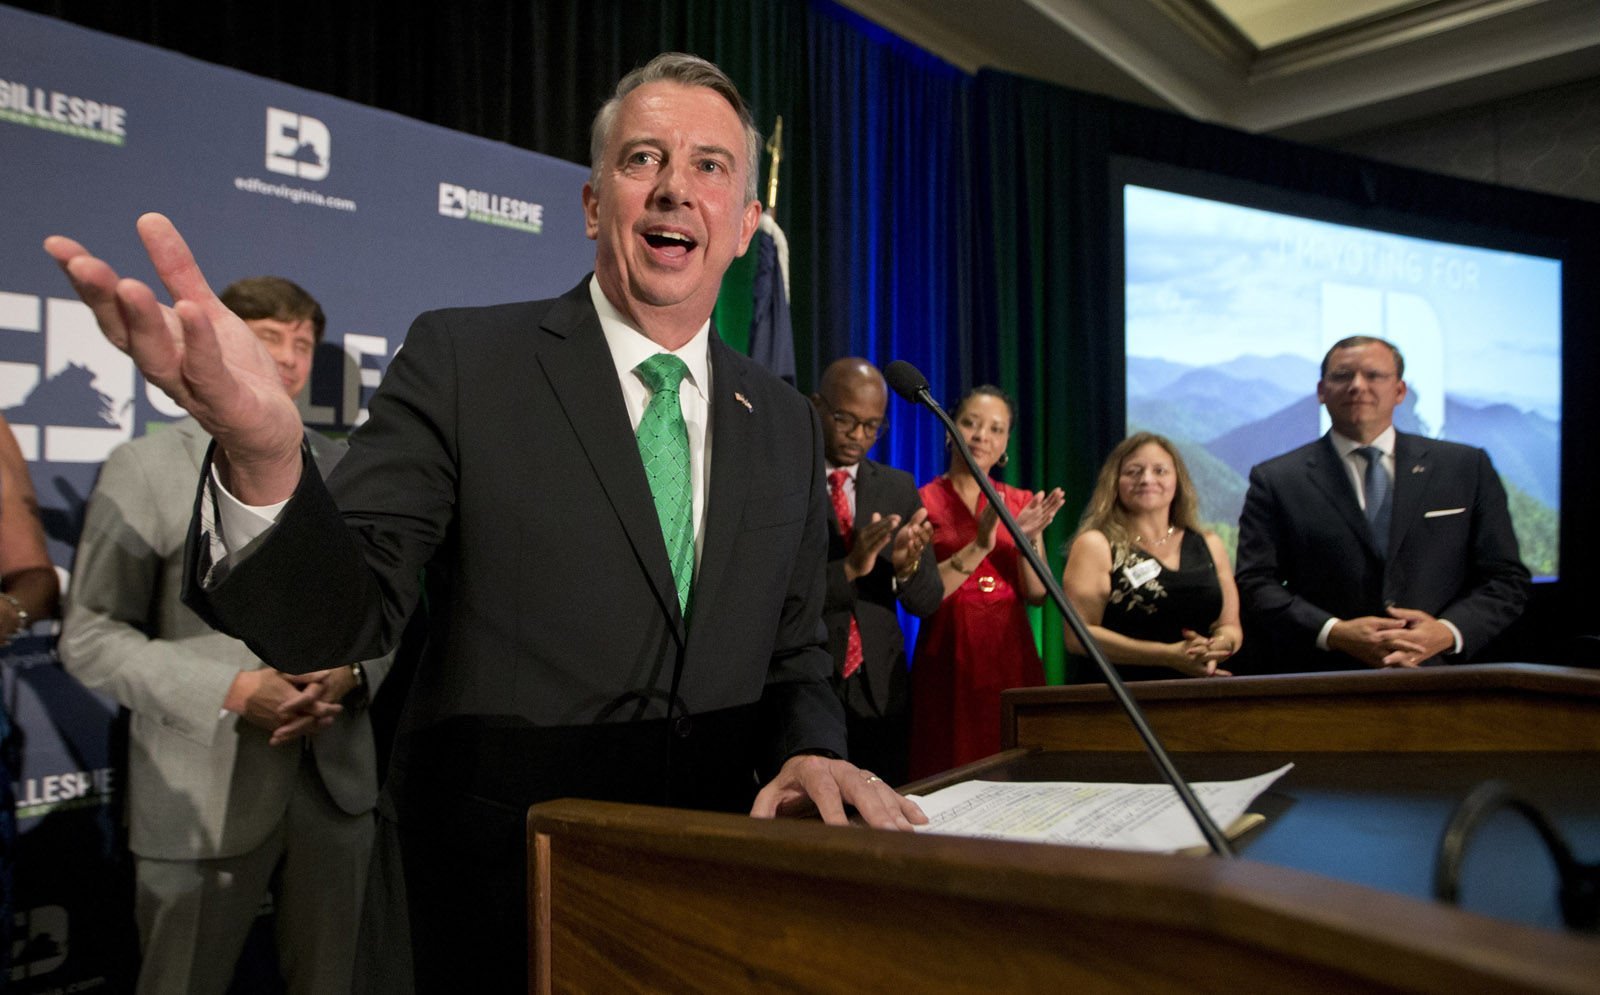 Republican candidate for governor, Ed Gillespie, smiles as he gives a victory speech at his victory party Tuesday, June 13, 2017, in Richmond, Va. Gillespie beat State Sen. Frank Wagner and Corey Stewart in today's primary. (AP Photo/Steve Helber)